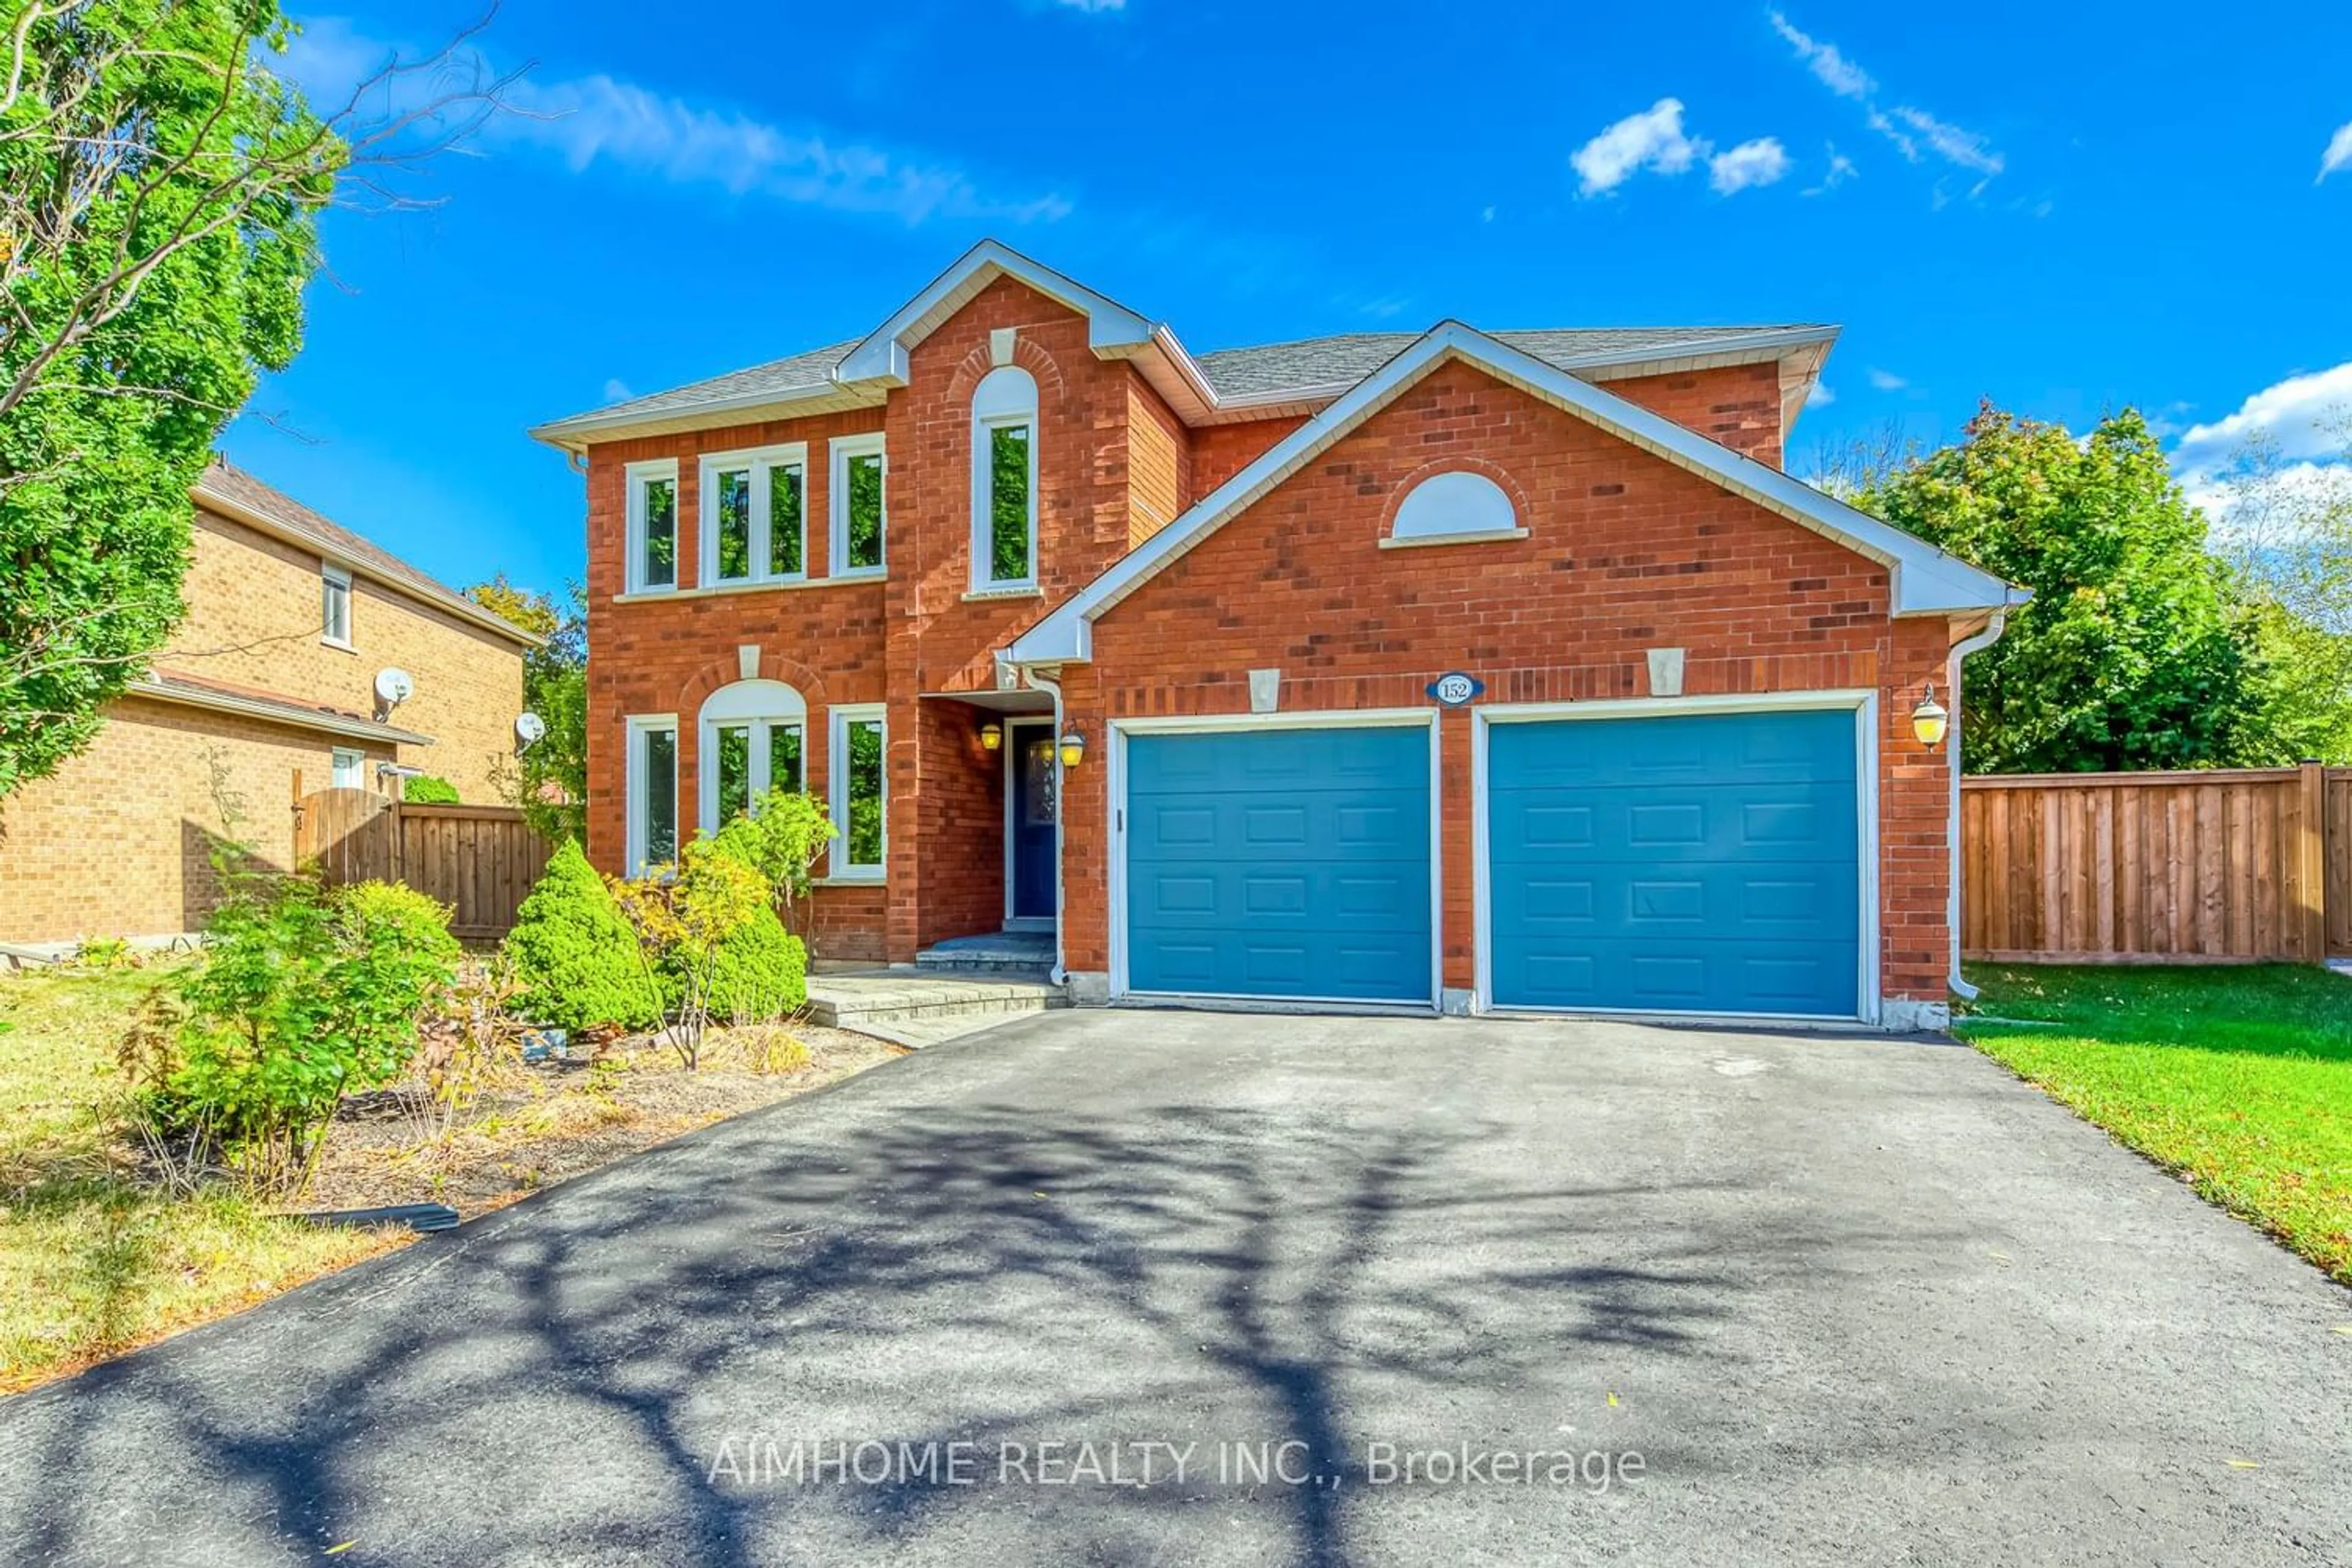 Home with brick exterior material for 152 Elderwood Tr, Oakville Ontario L6H 5W4